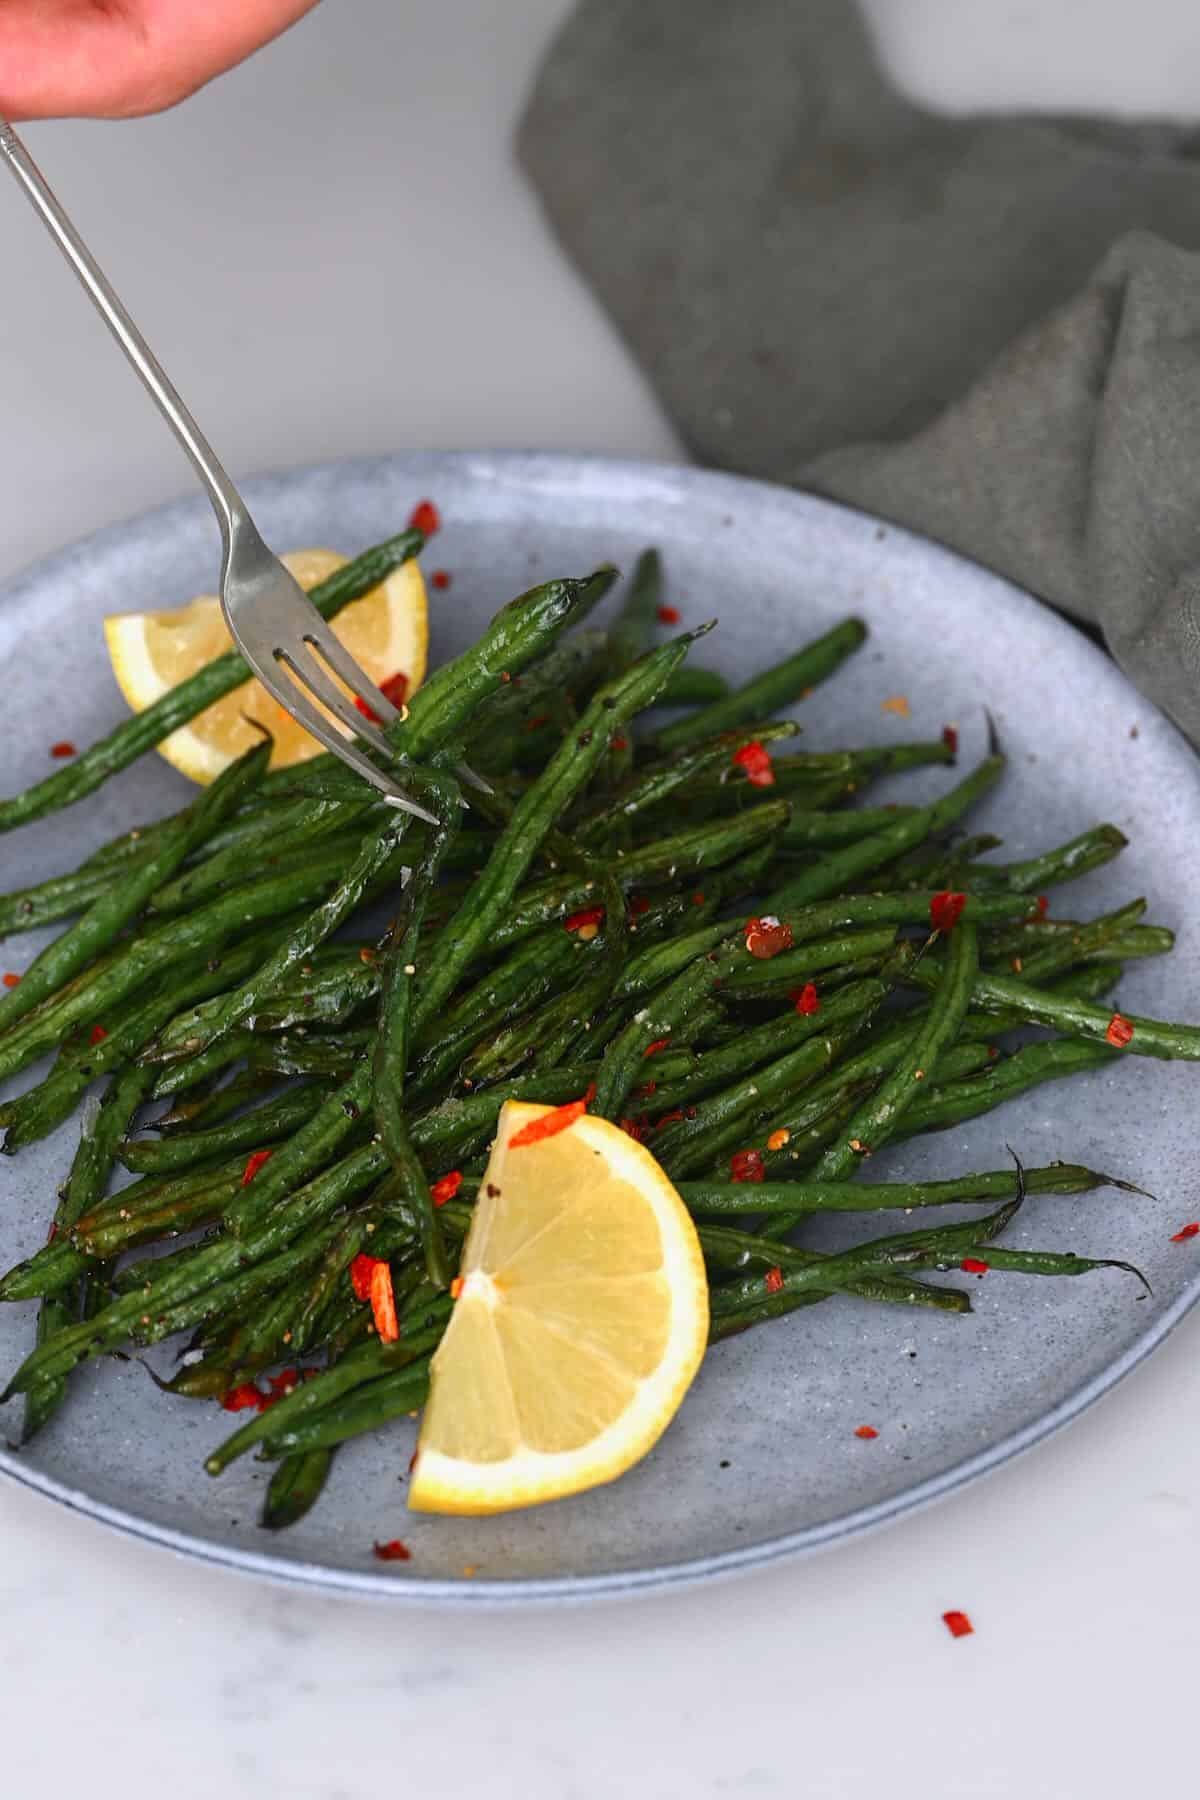 A serving of air fried green beans with lemon wedges